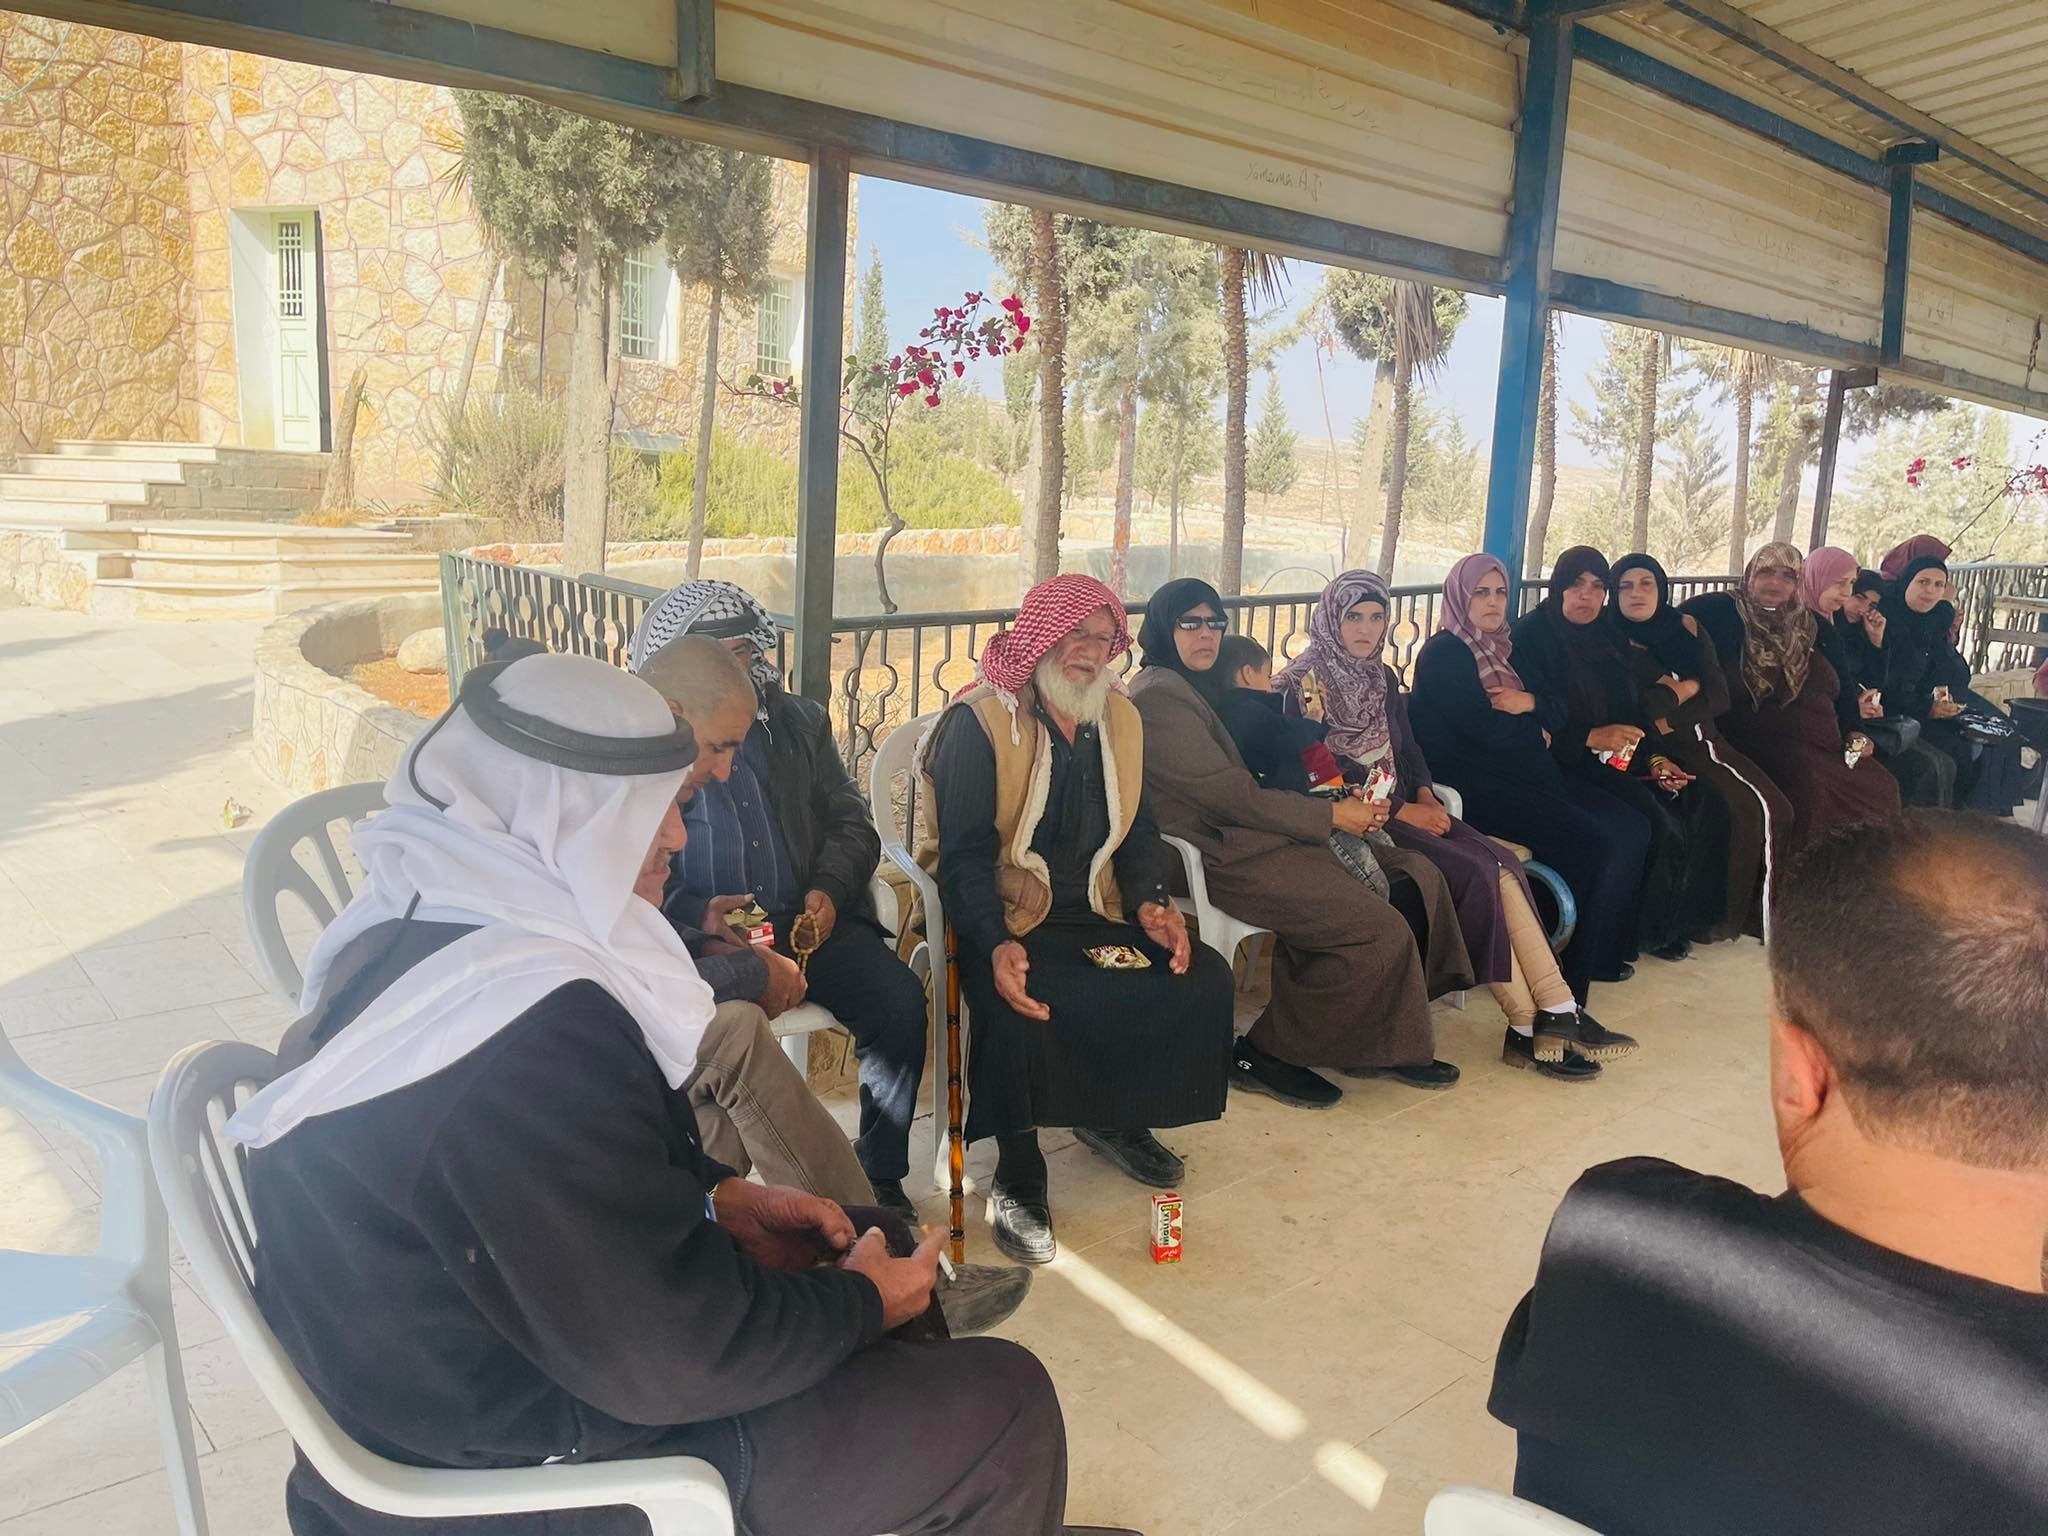  The Unified Bedouin Women’s Council in the West Bank kicking off Public and Announcement hearing Sessions with decision-makers